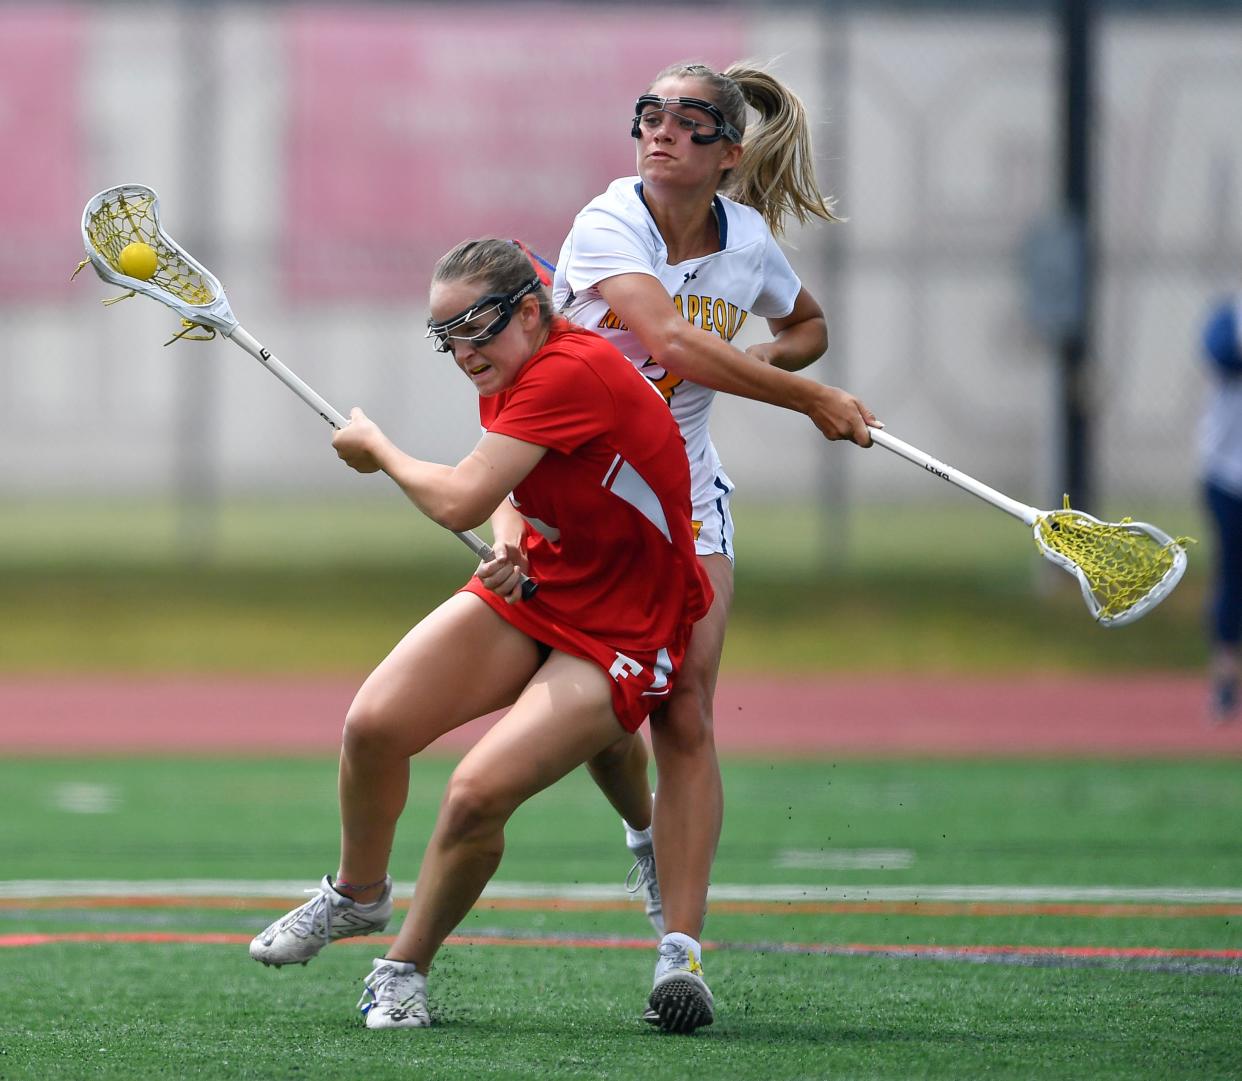 Fairport's Ella Peers, left, avoids pressure from Massapequa's Joely Caramelli during the NYSPHSAA Girls Lacrosse Championships Class A final in Cortland, N.Y., Saturday, June 10, 2023.  Fairport won the Class A title with an 10-9 double overtime win over Massapequa.